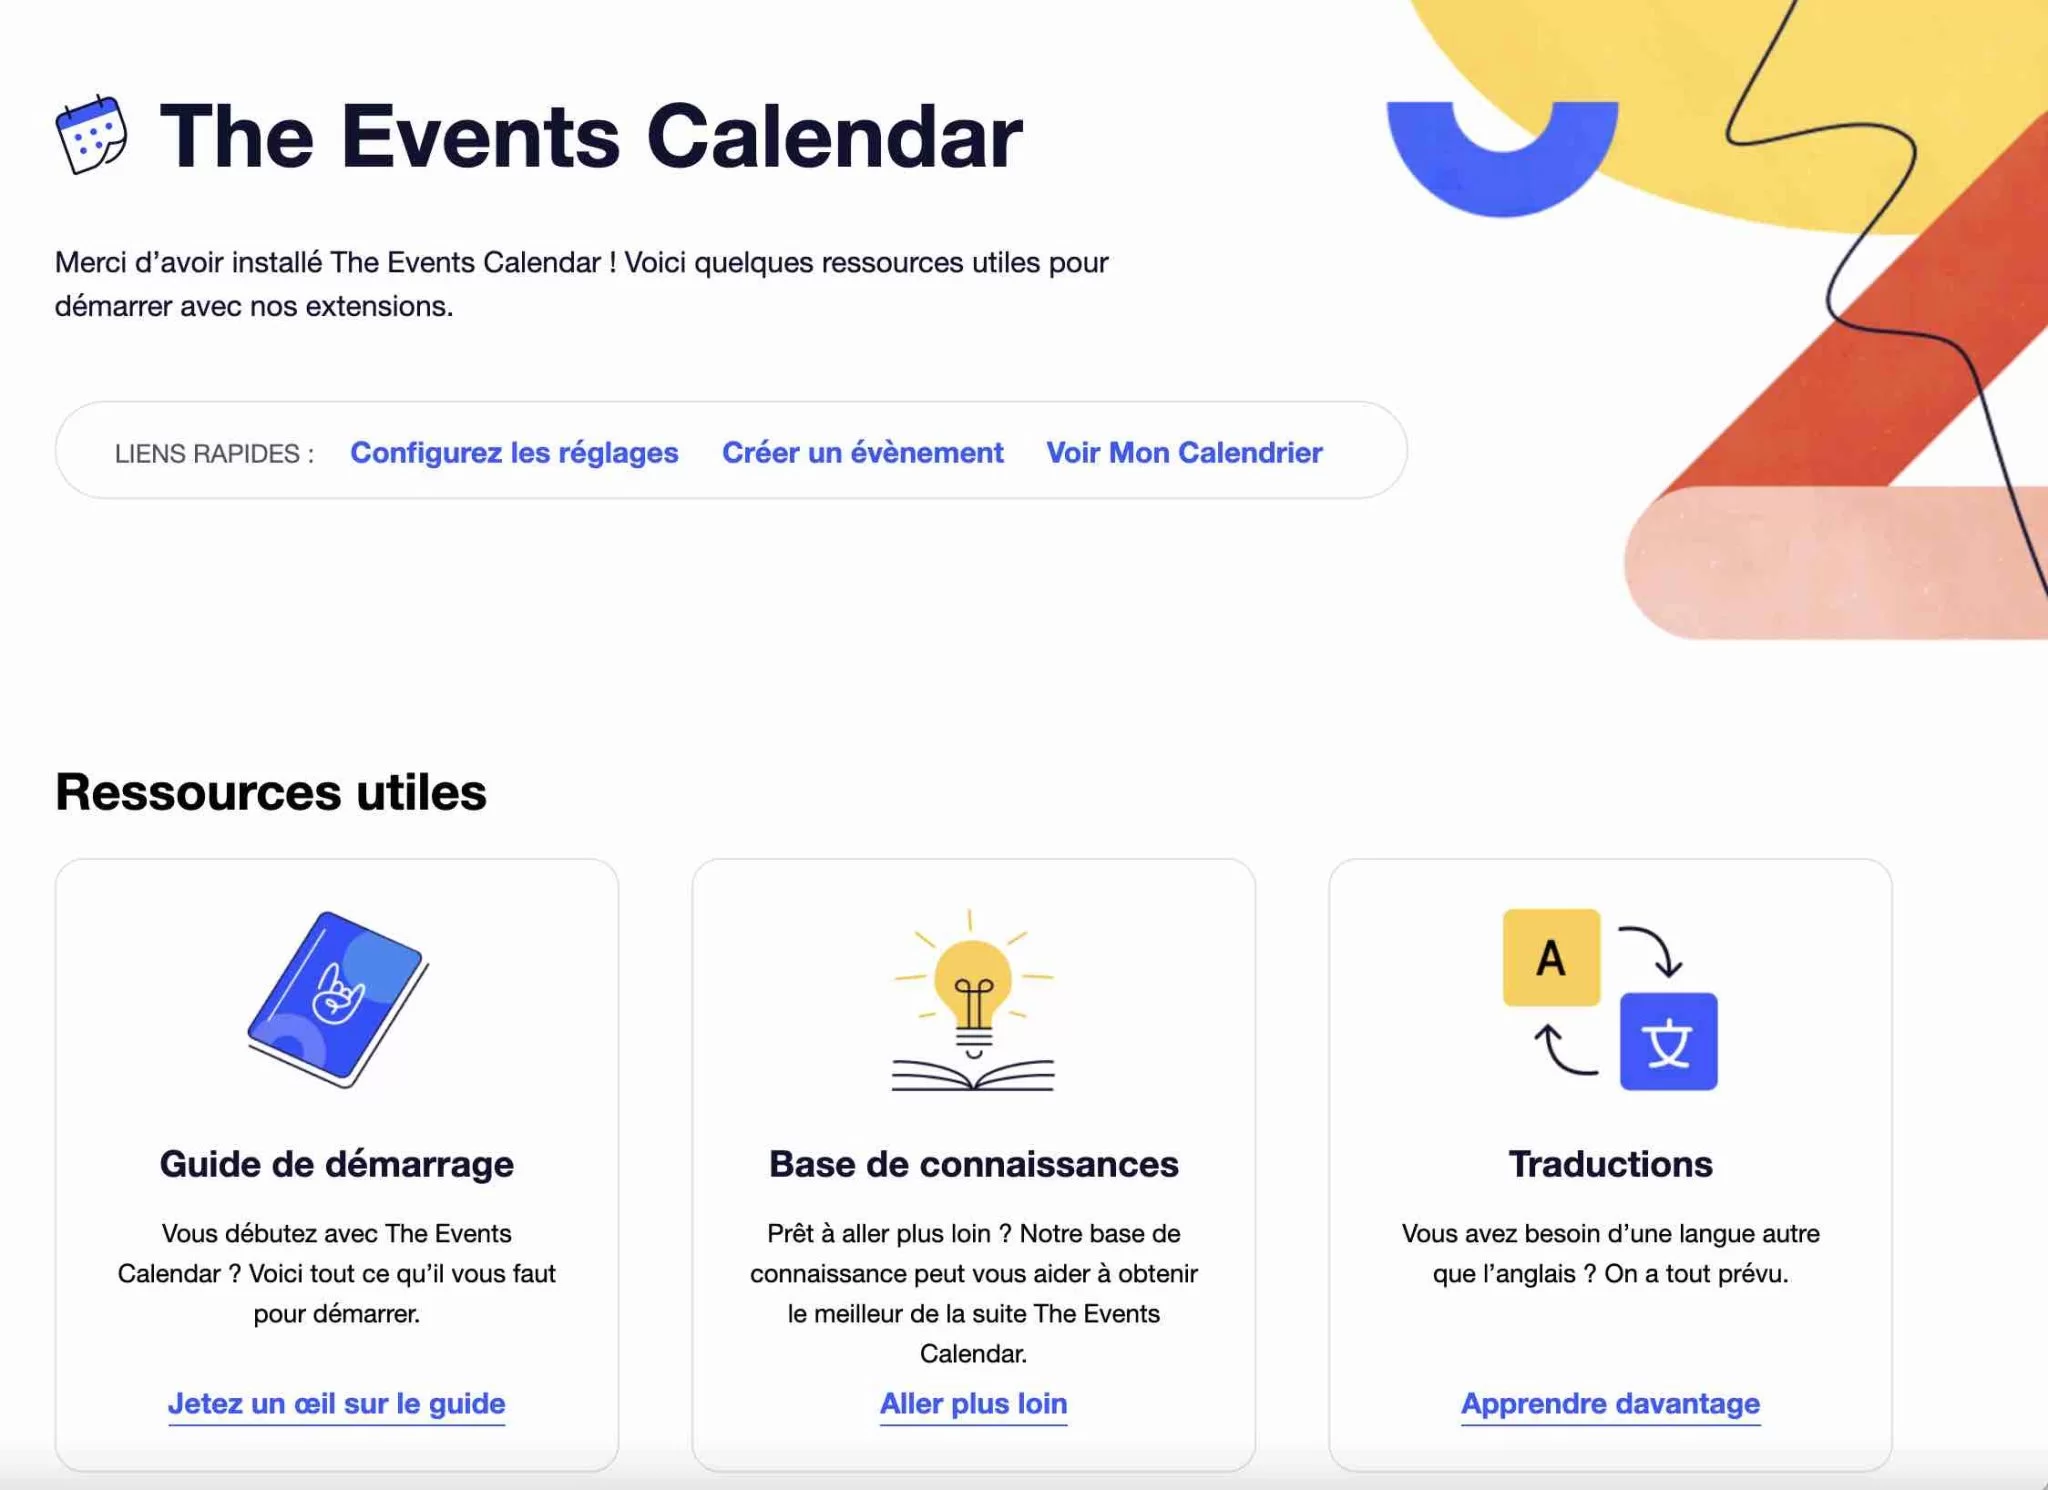 The Events Calendar offers useful resources after activation.